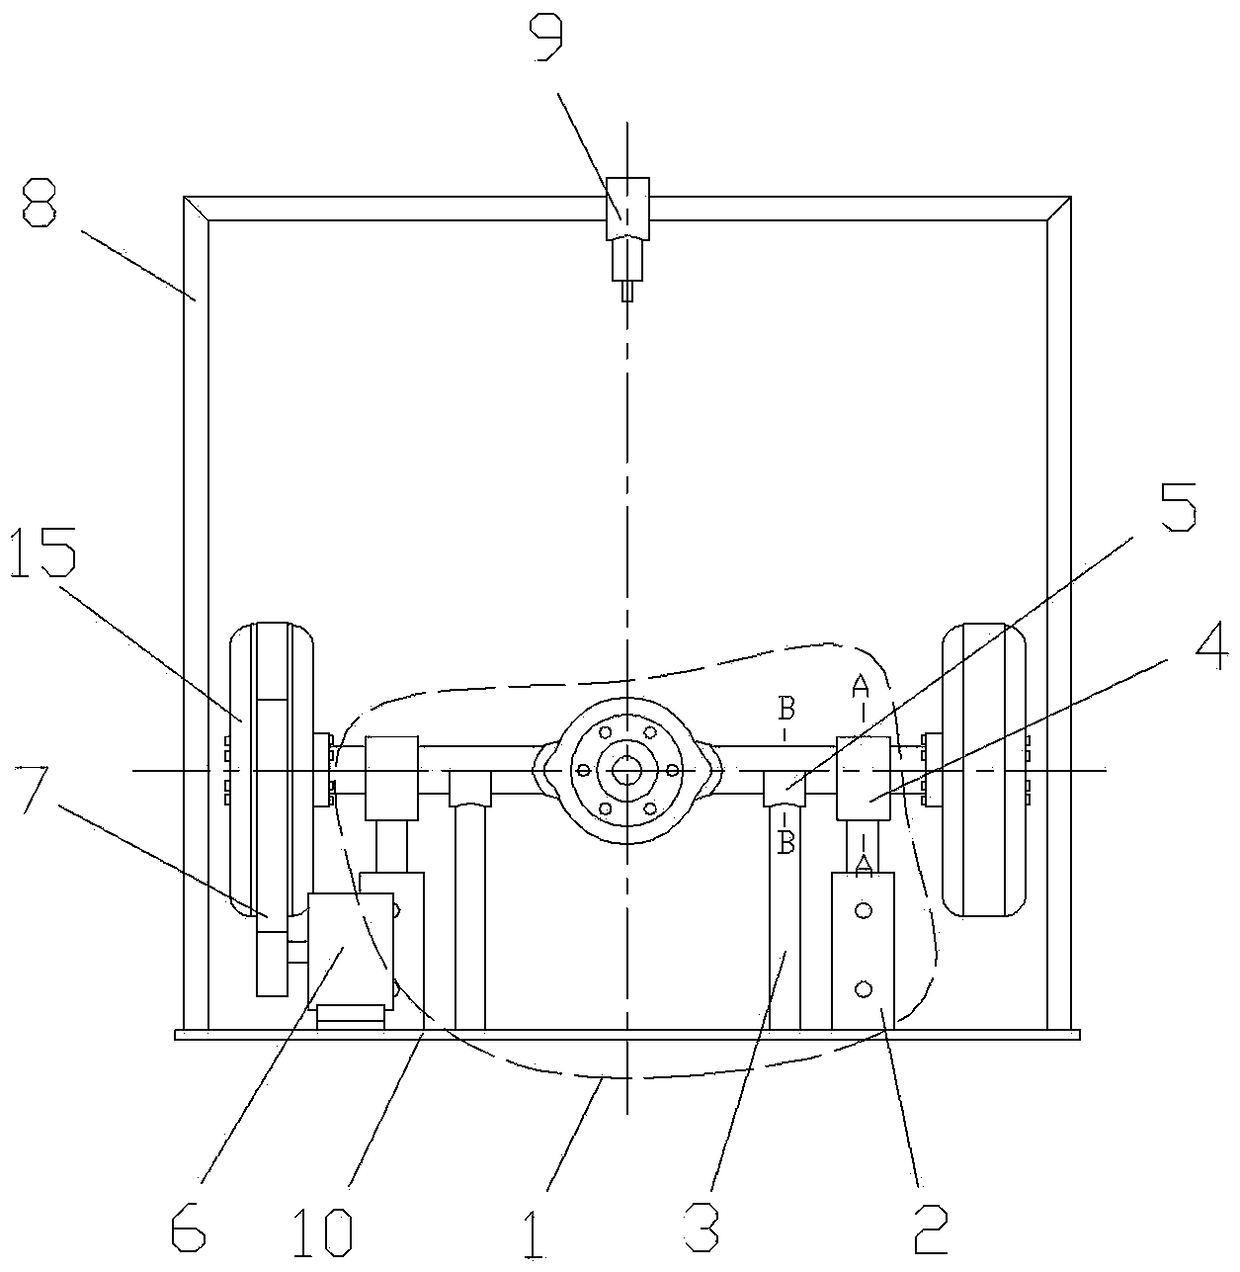 Performance testing device for axles